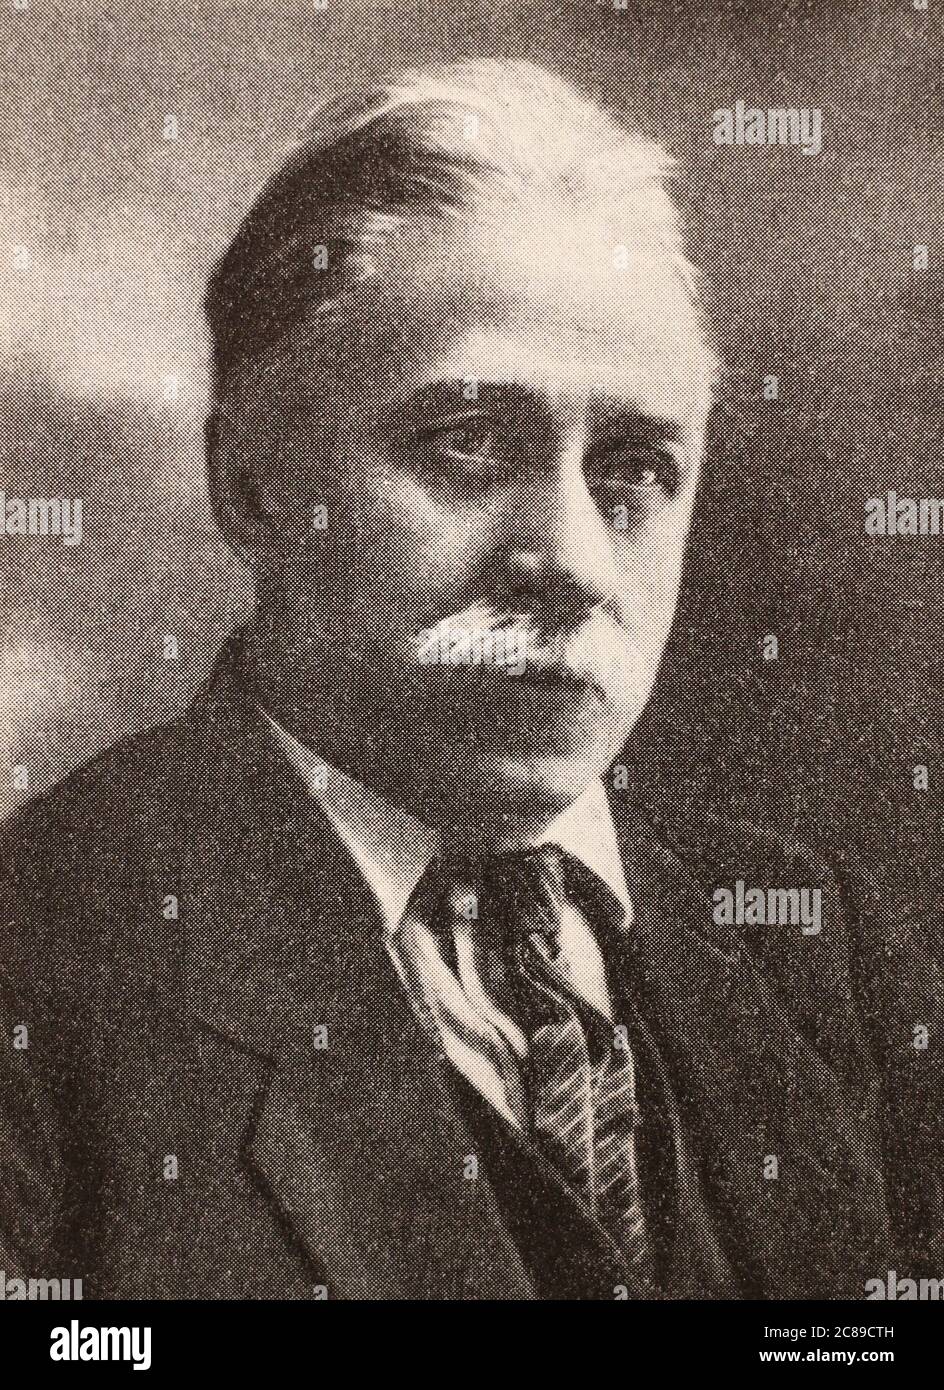 Pyotr Ivanovich Stuchka was a Latvian jurist and communist politician who served as the leader of Bolshevik government in Latvian SSR during the Latvian War of Independence. Stock Photo